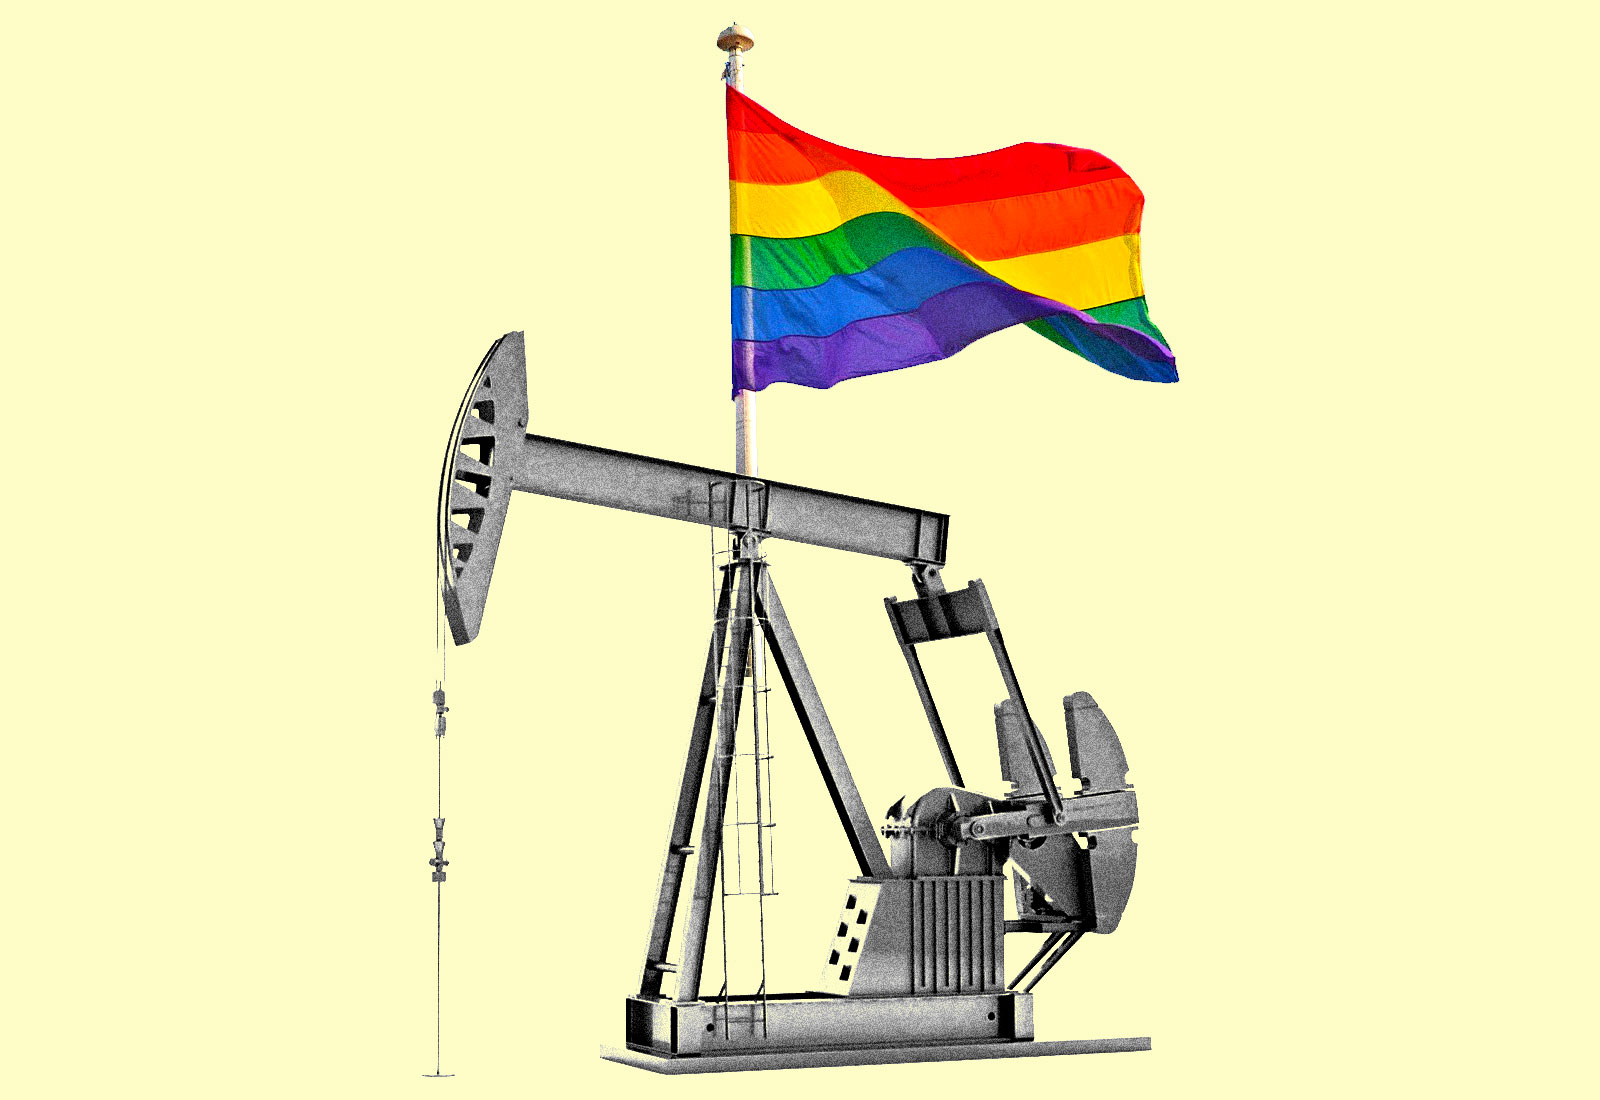 Collage: an oil pumpjack with a rainbow flag mounted on top of it symbolizing 